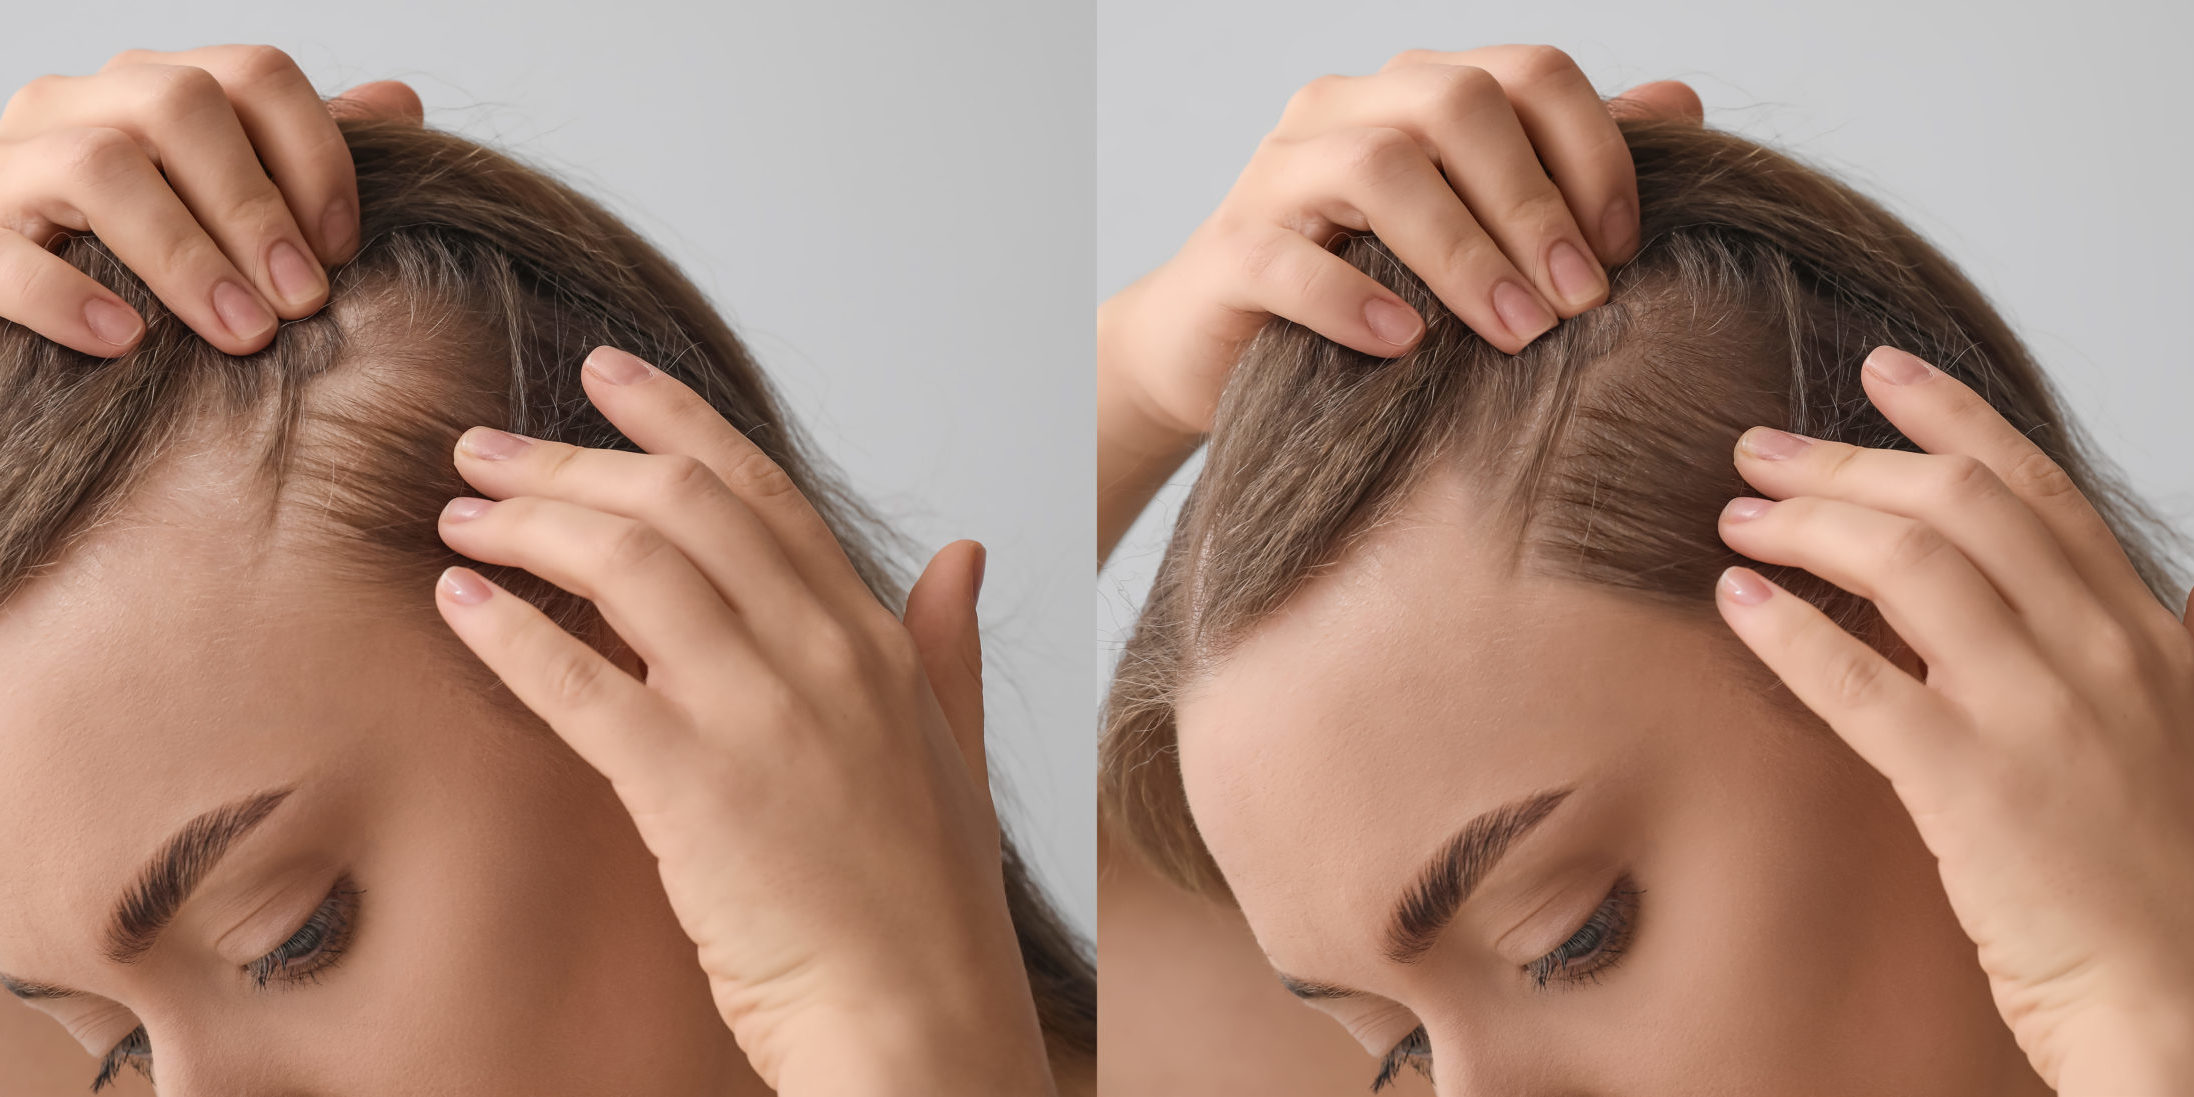 Common Causes of Hair Loss in Women